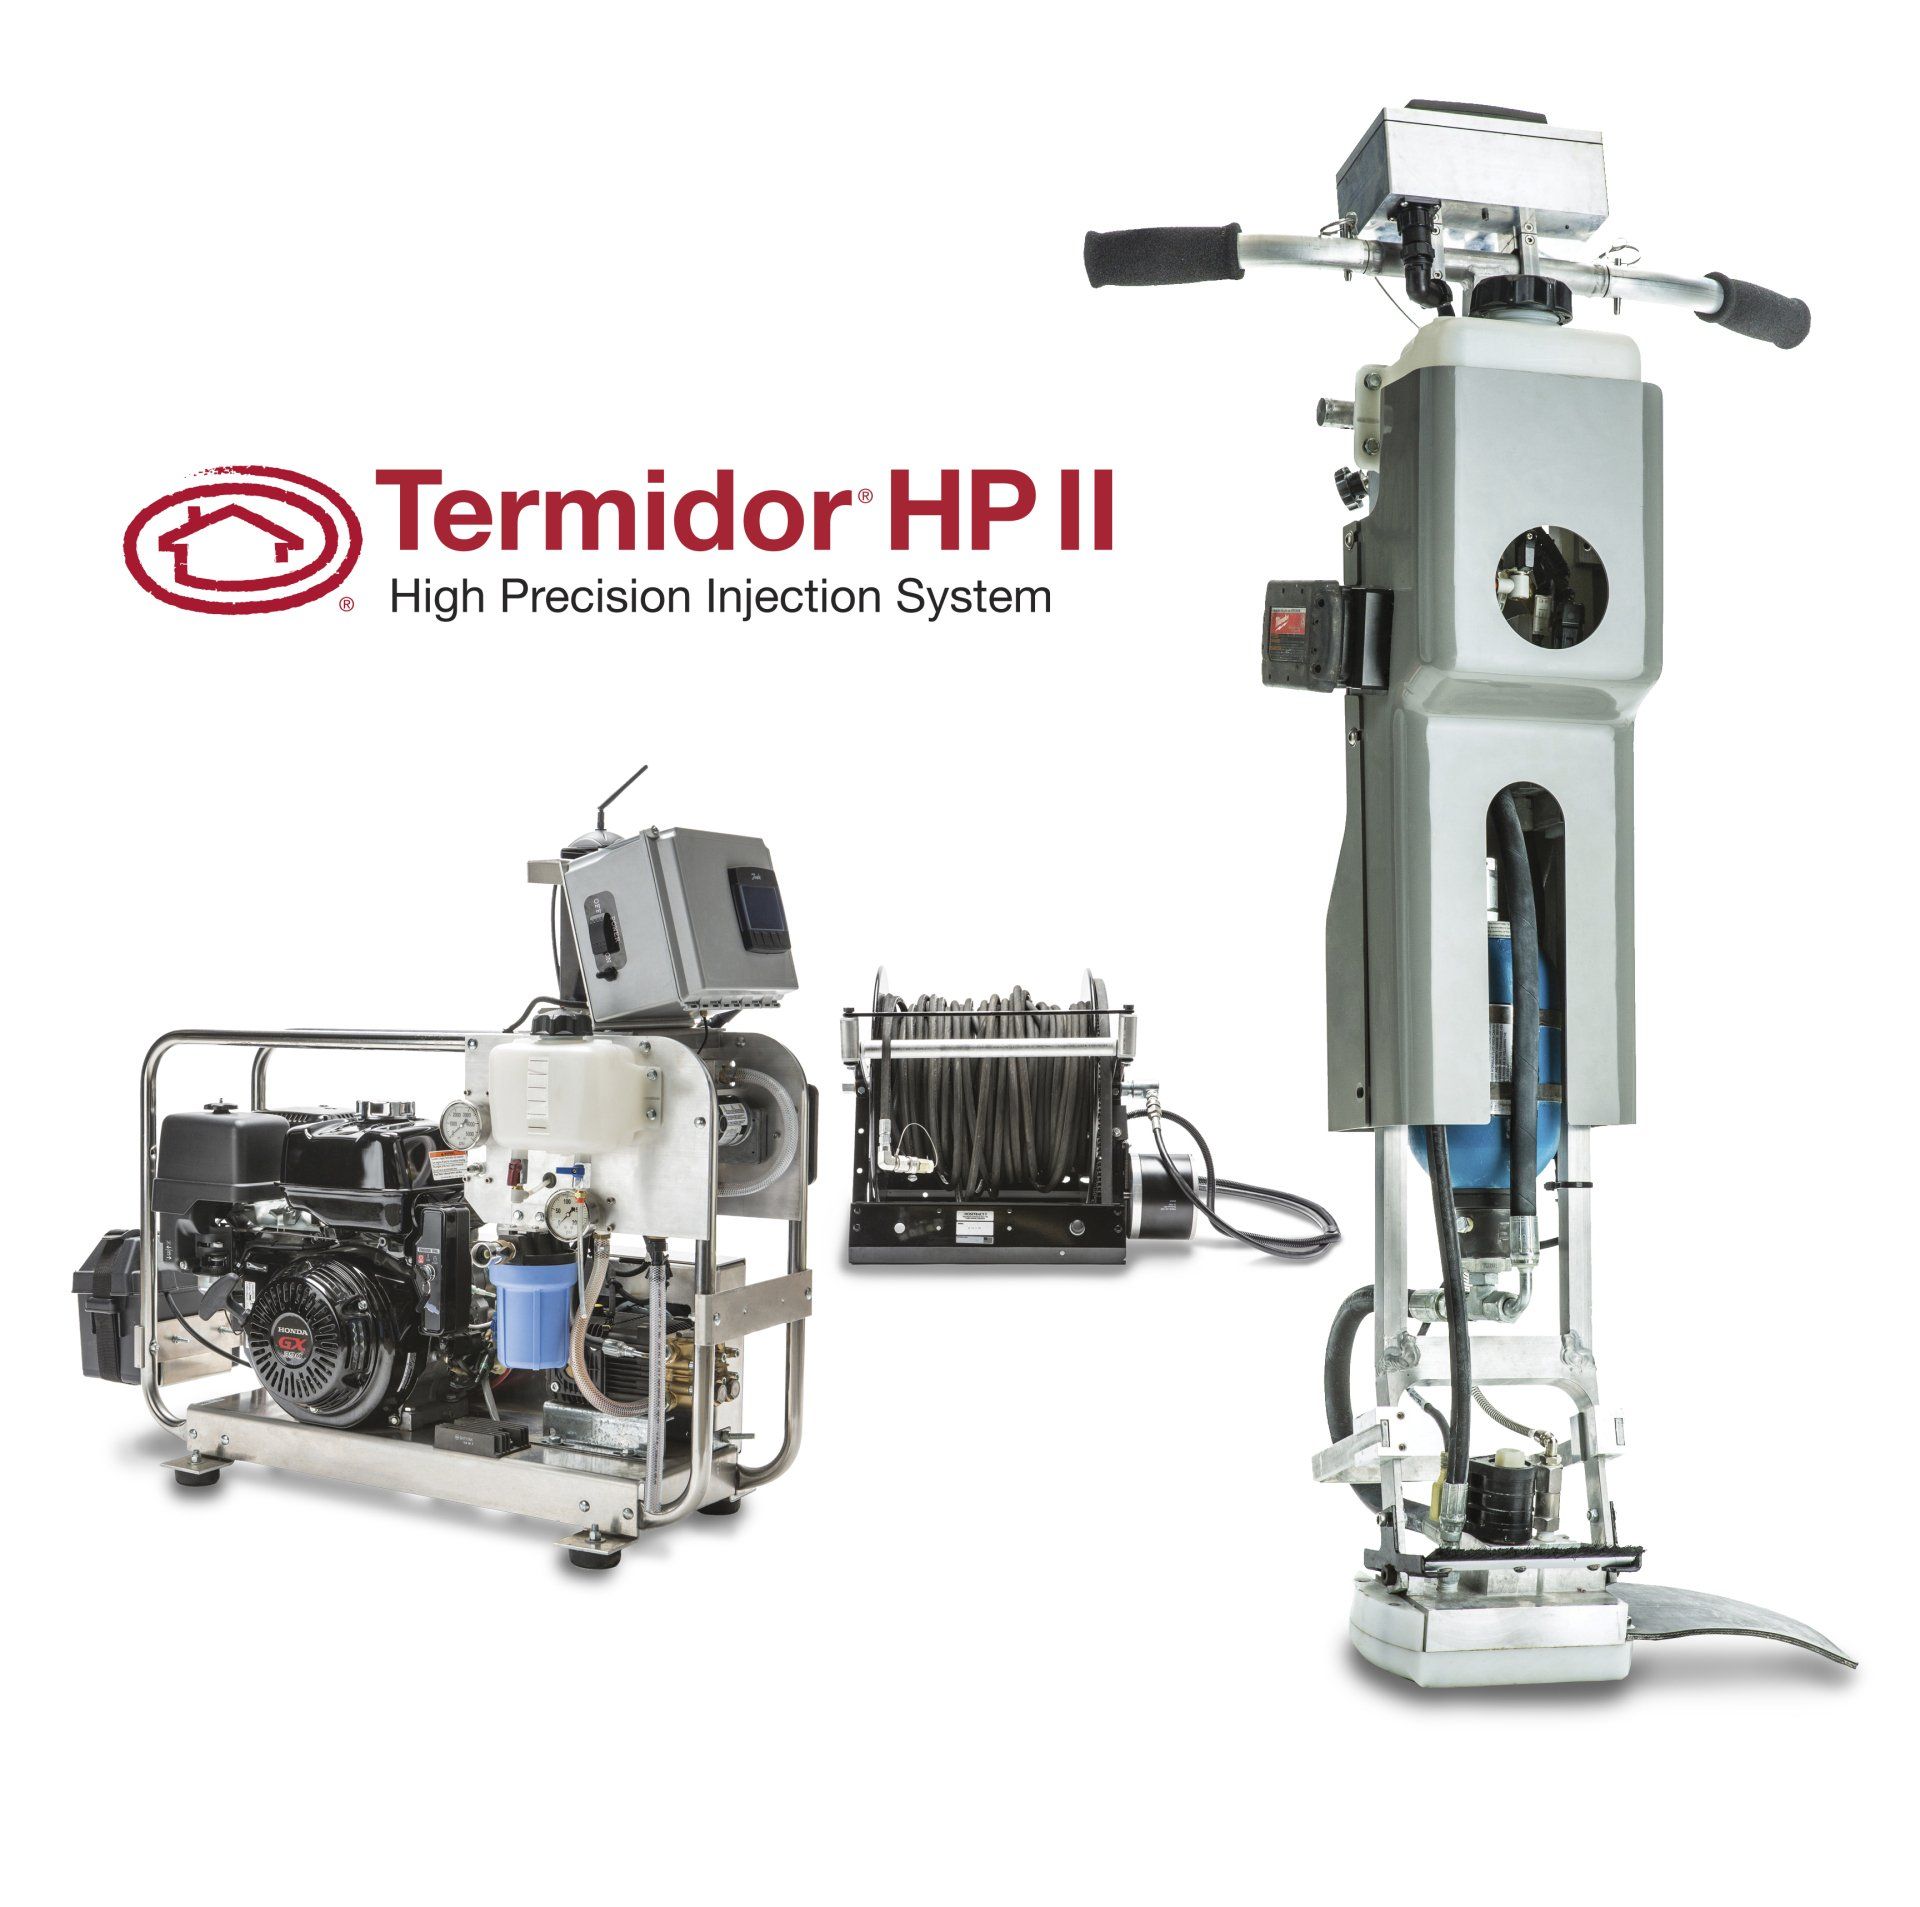 Termidor HP !! High Precision Injection System